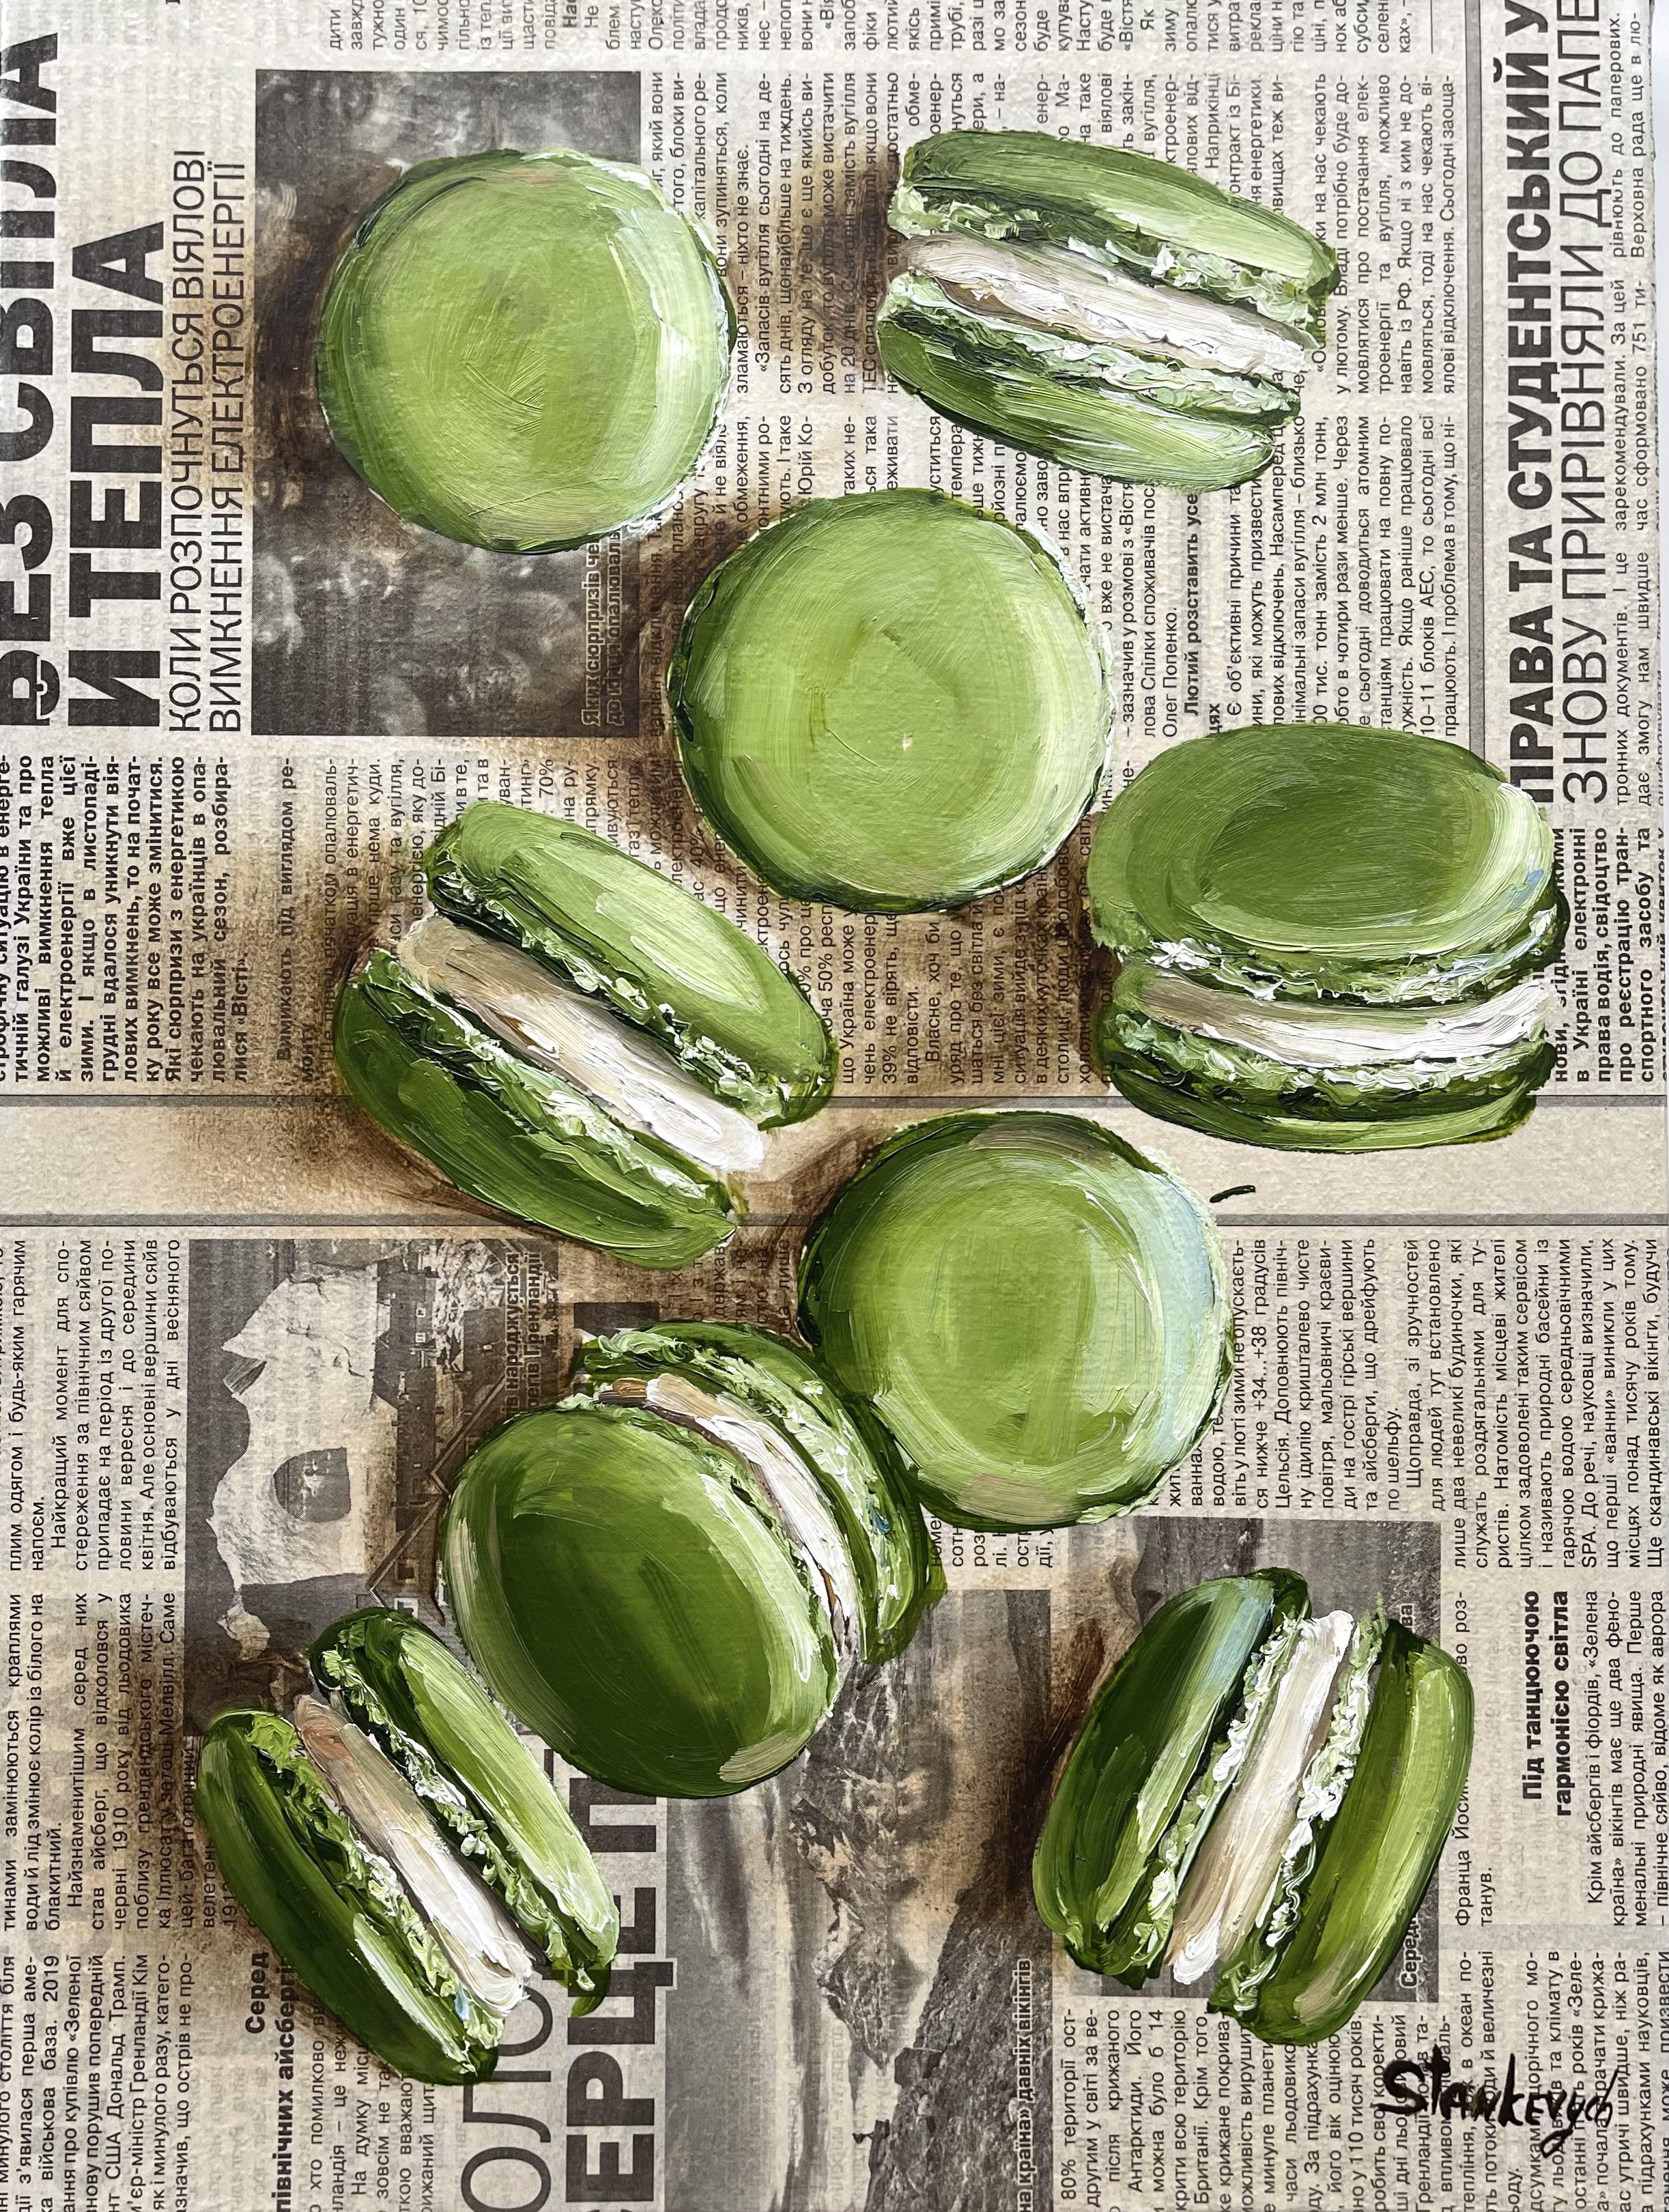 Matcha macarons by JuliaStankevych